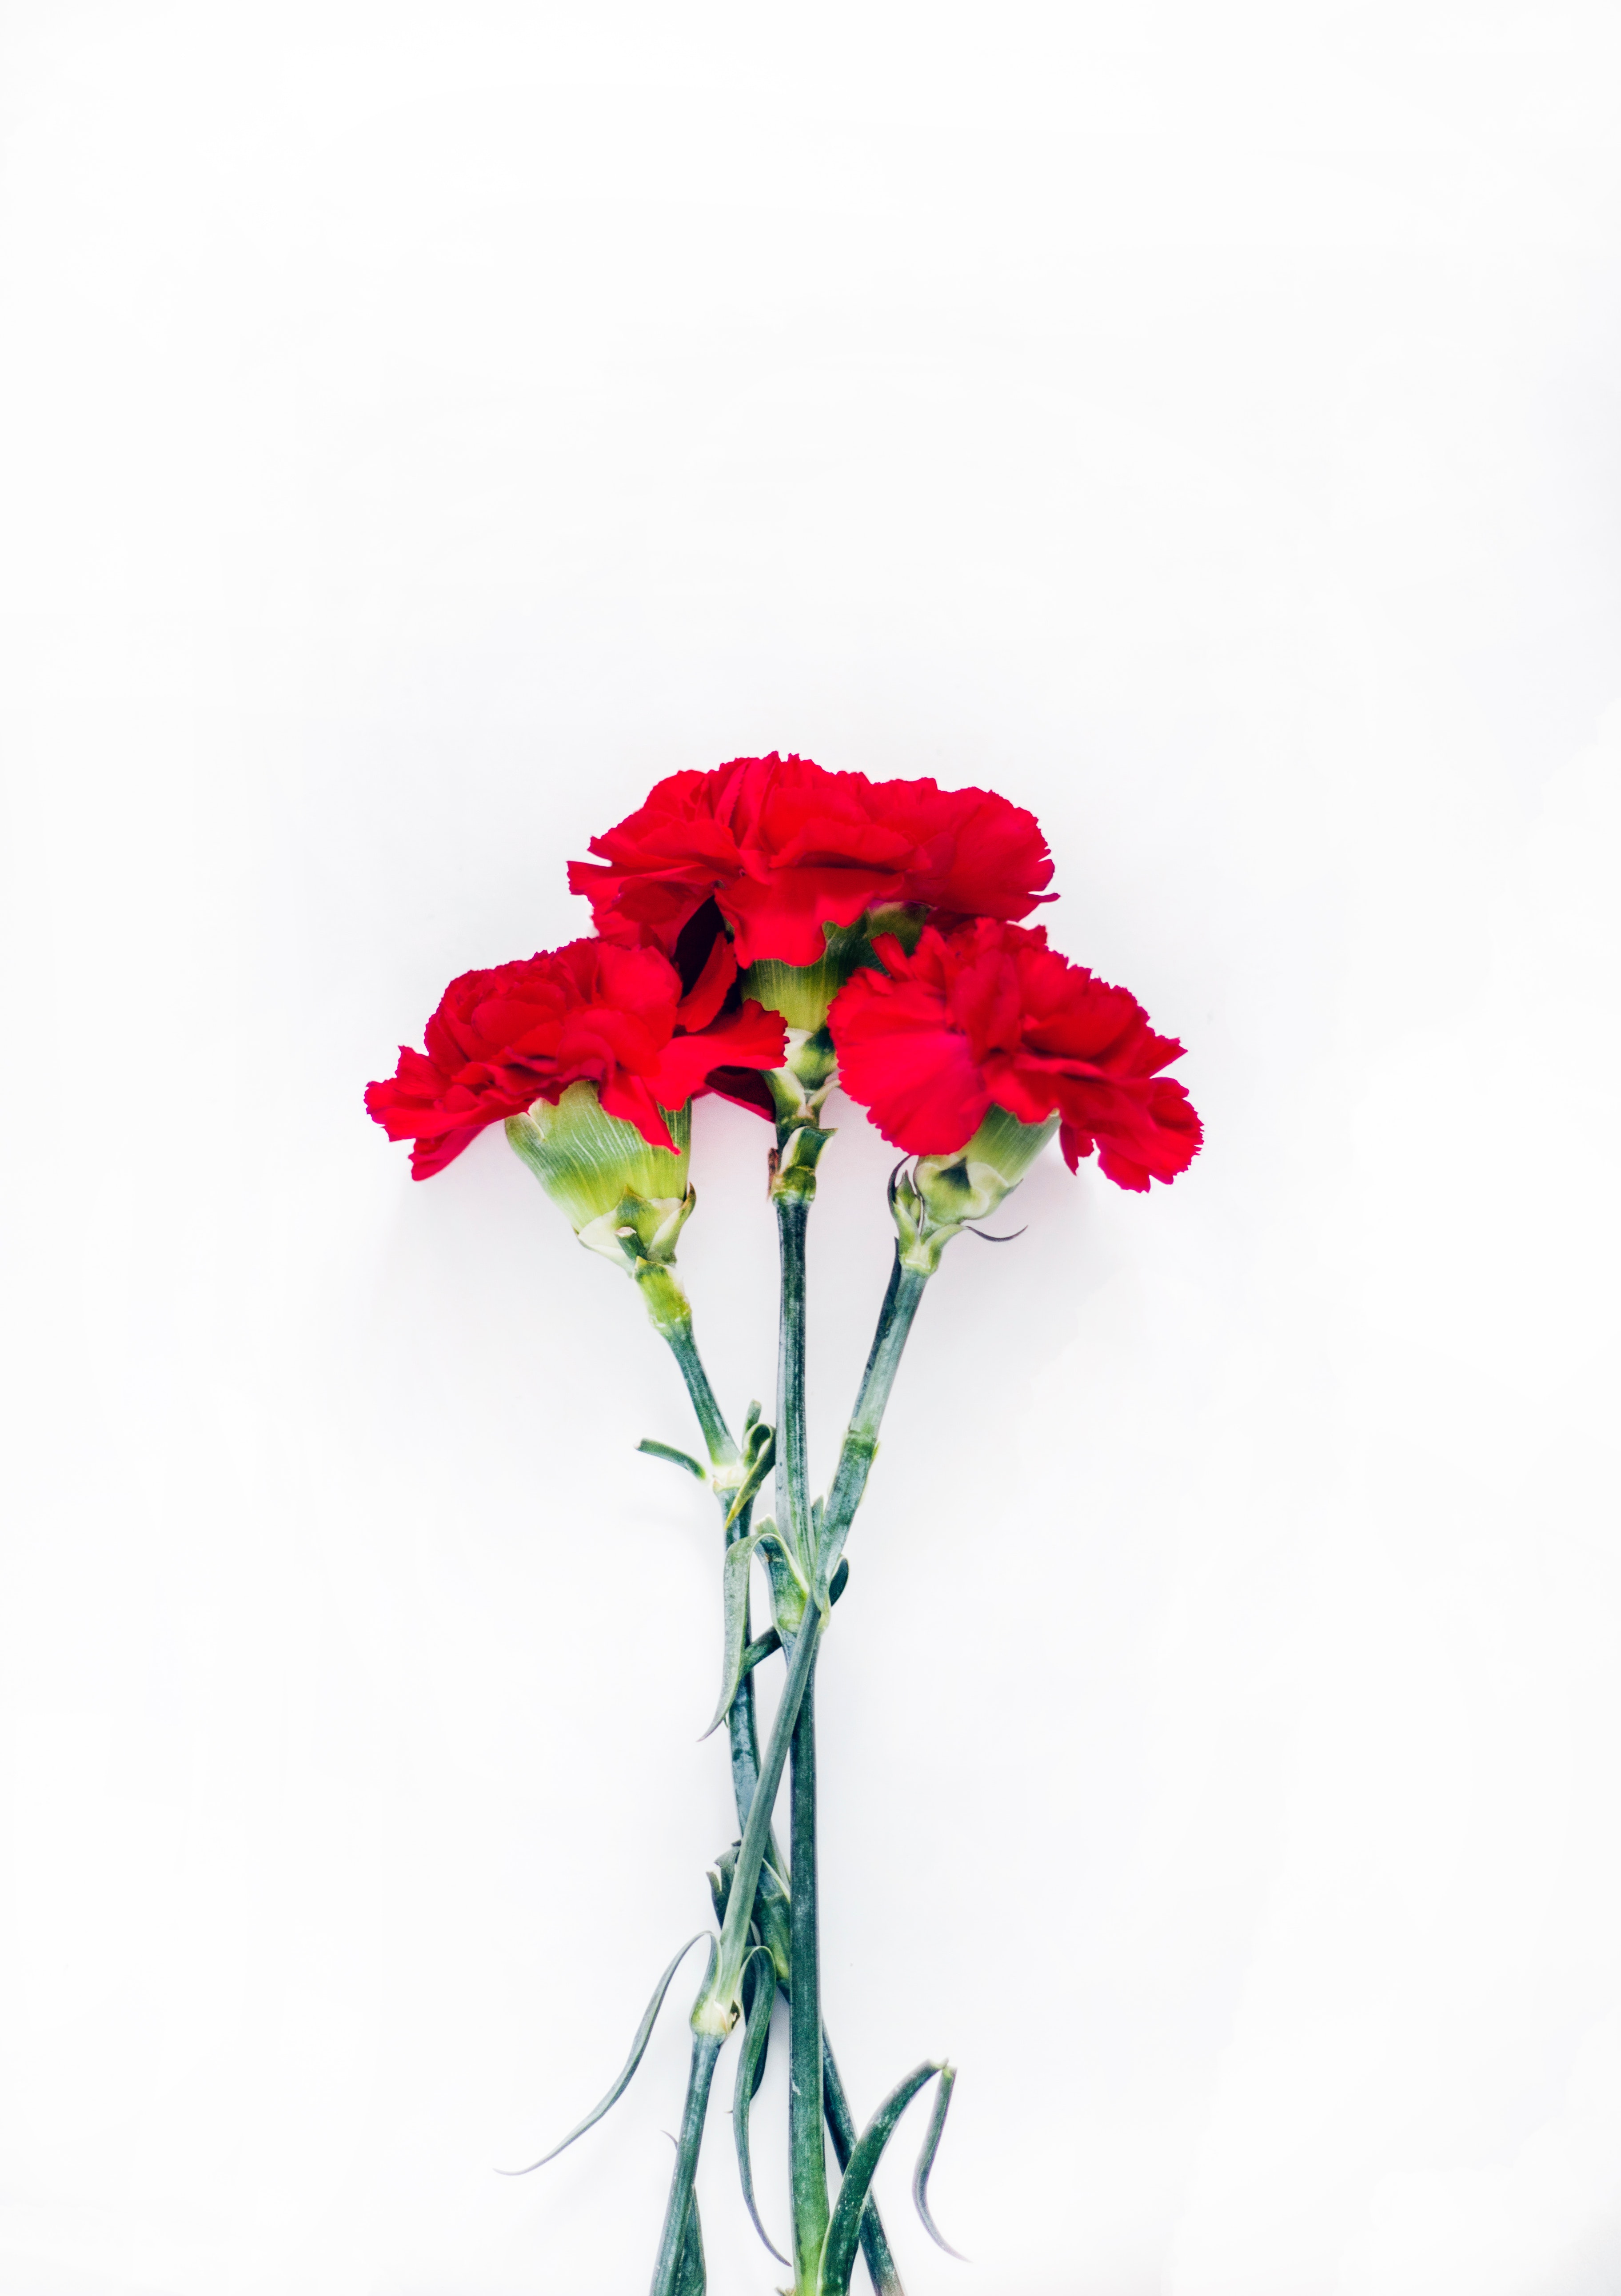 Flatlay photography of red carnations